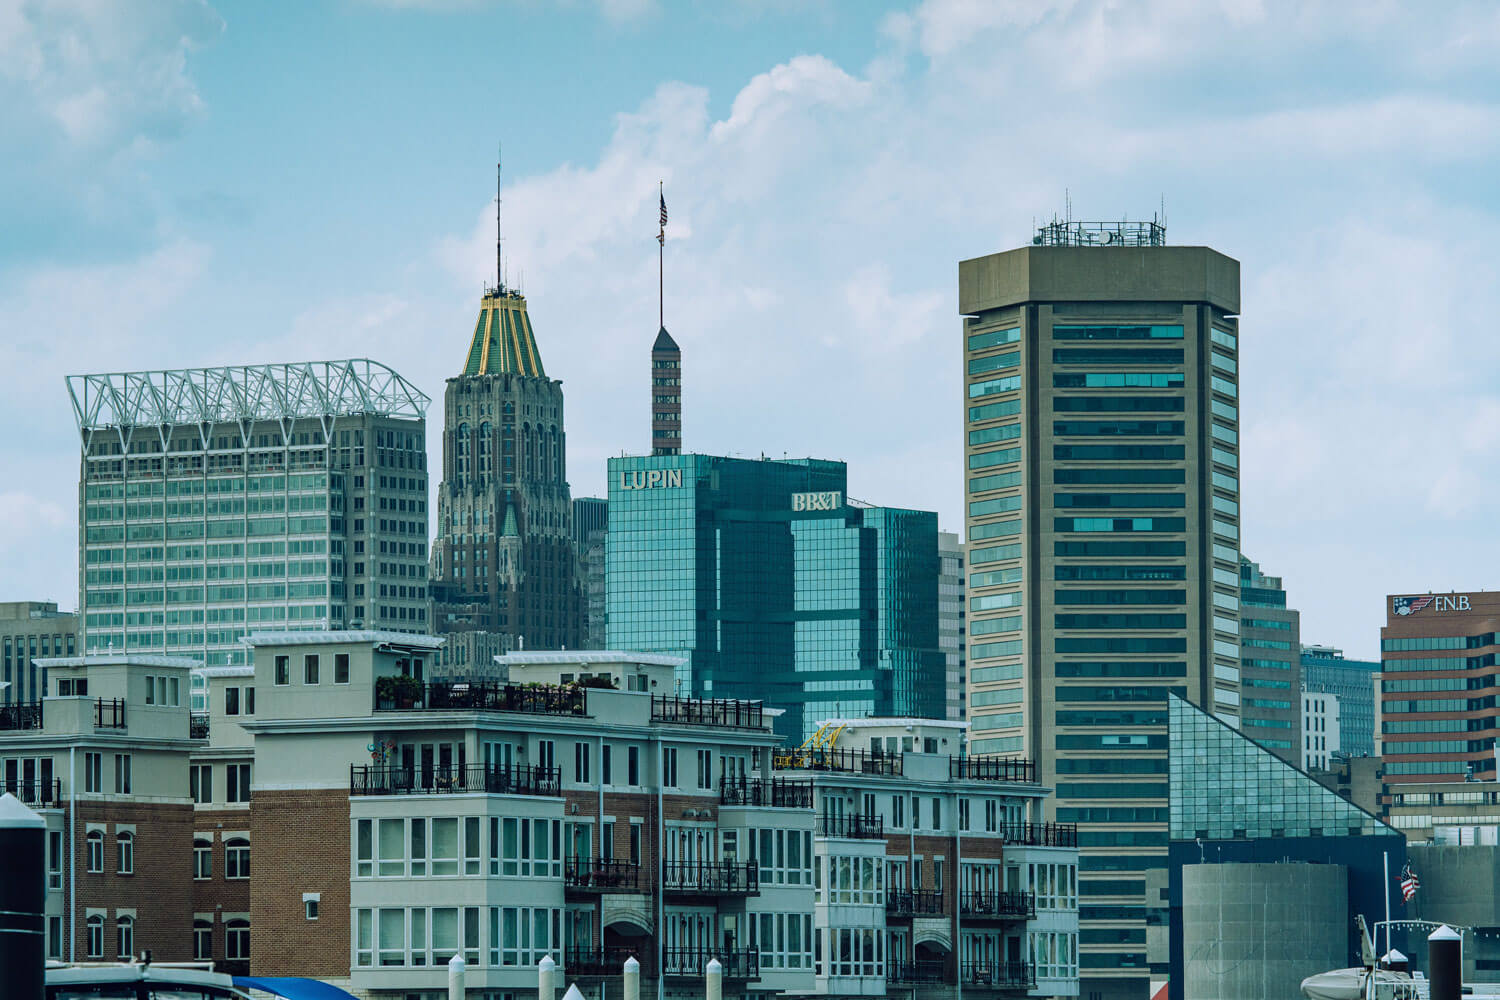 An image featuring tall buildings located in Baltimore, Maryland